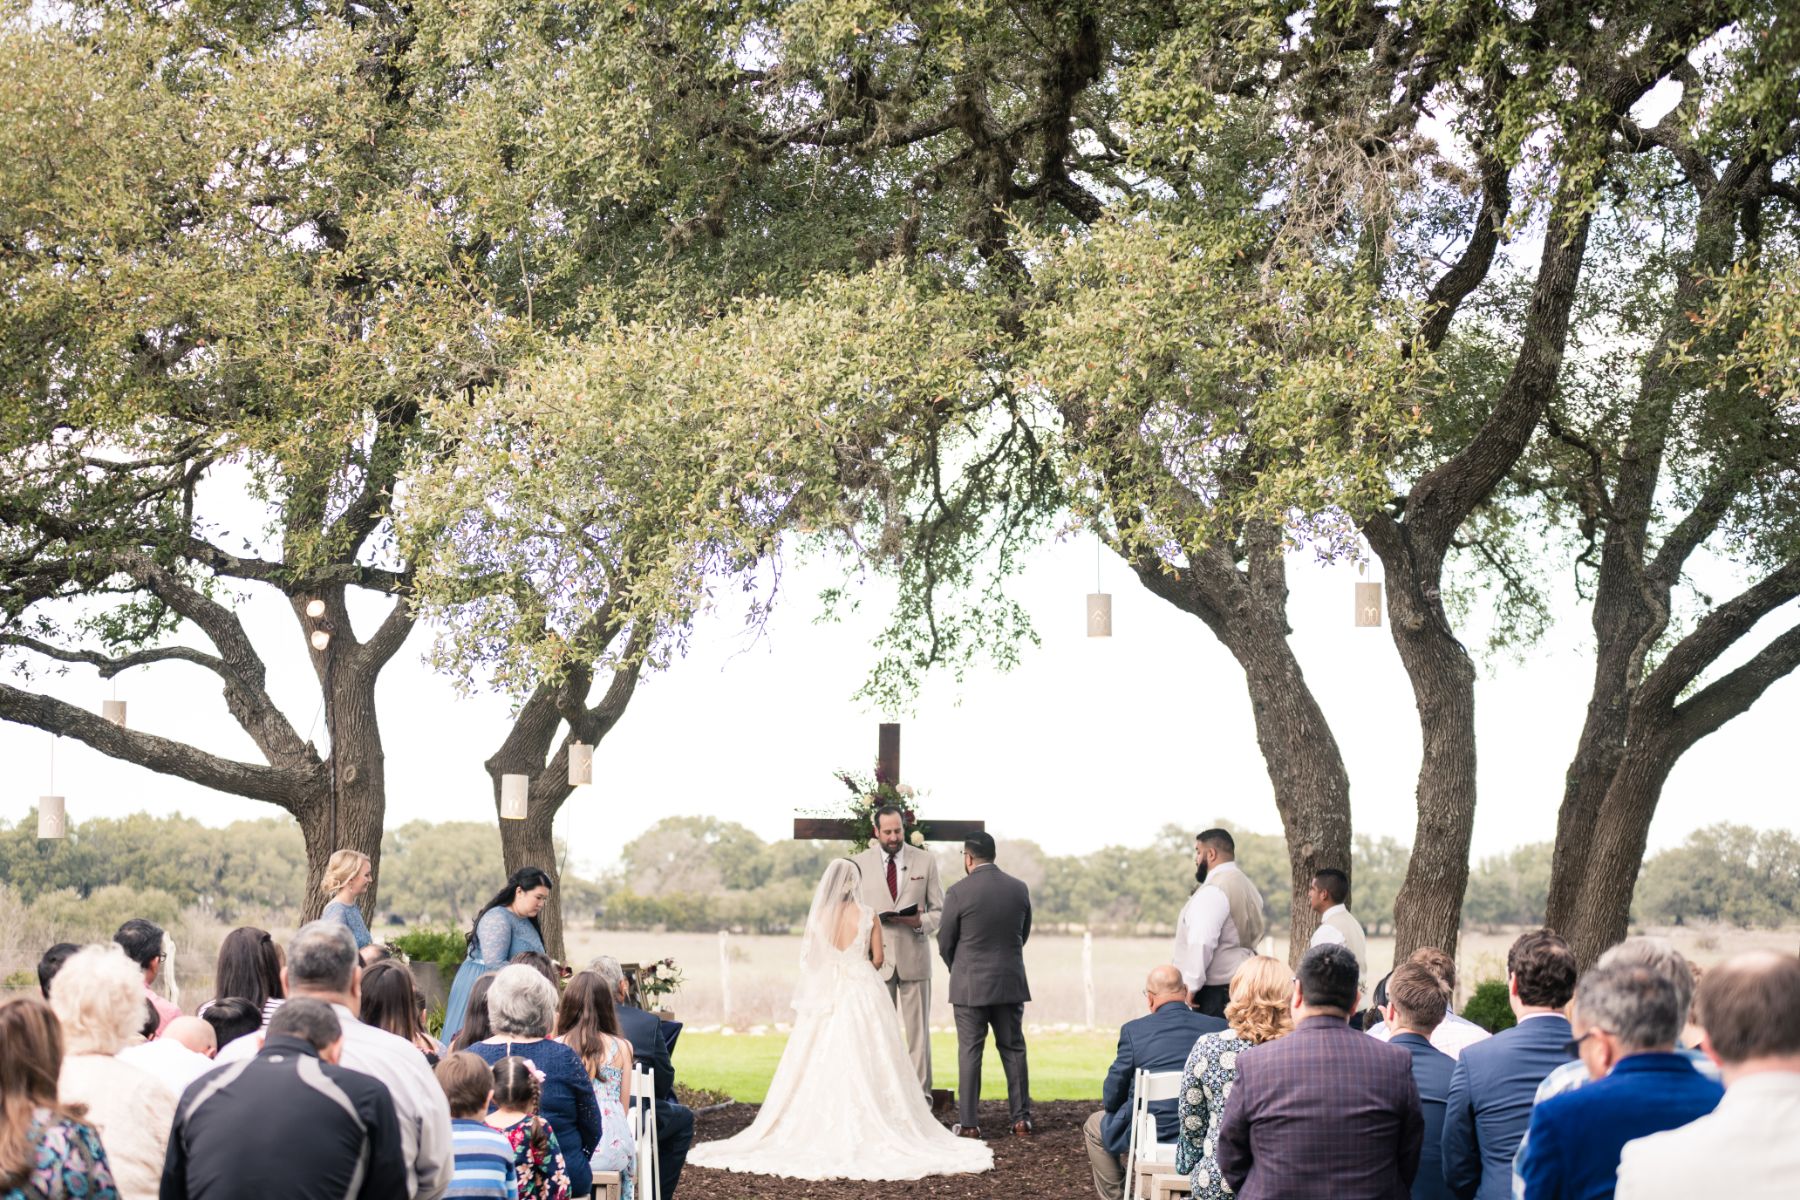 Bride and groom, standing at the altar of their outdoor wedding ceremony at Stonehouse Villa, under large Texas oak trees.